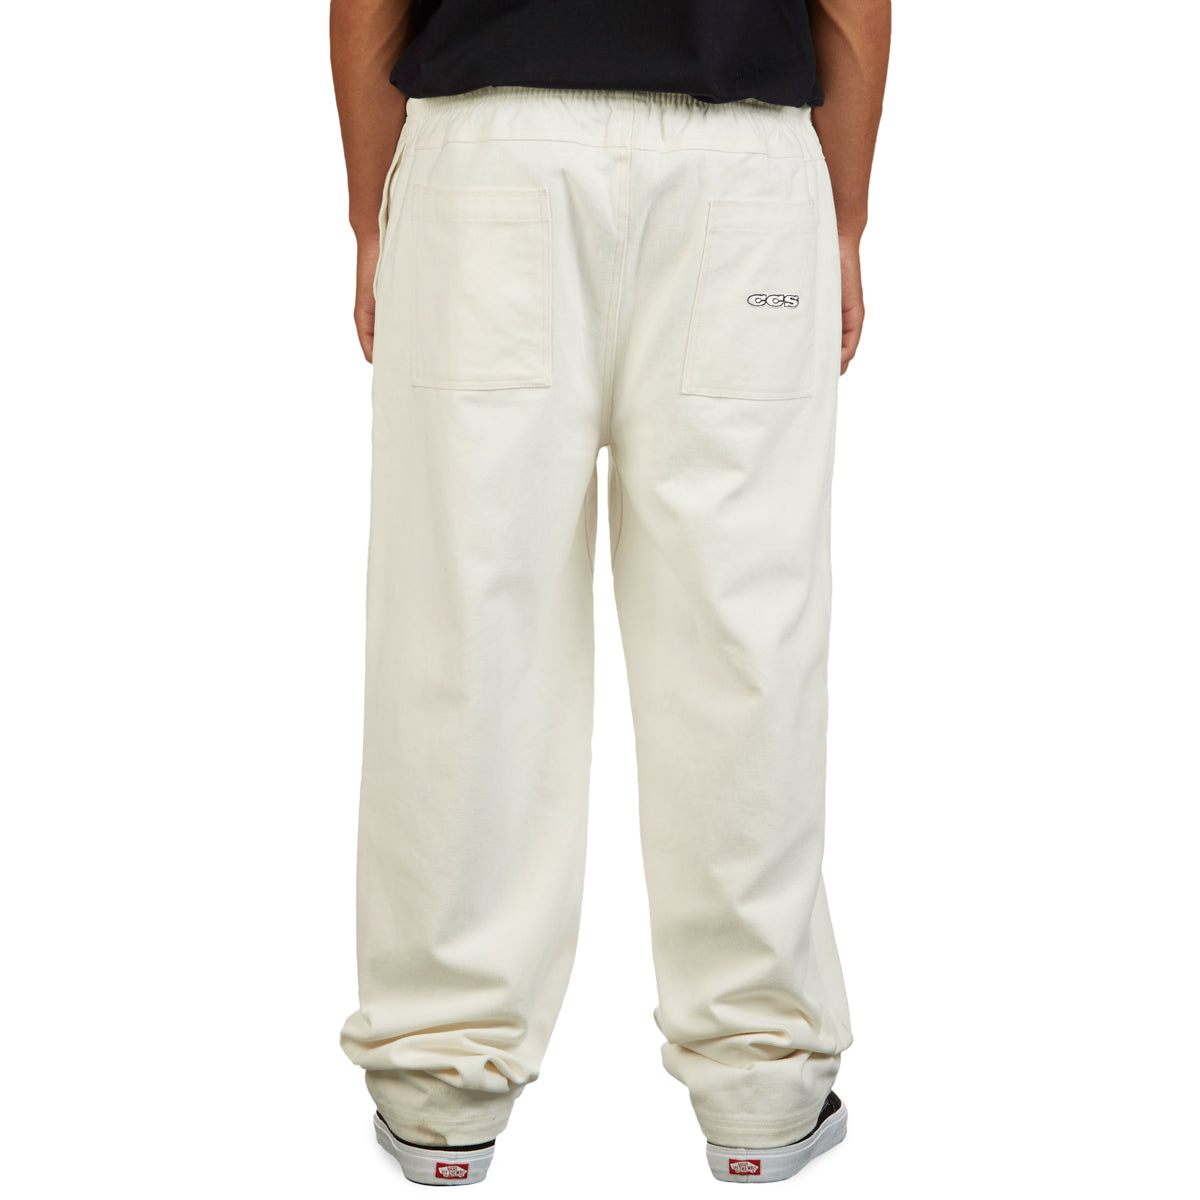 CCS Easy Twill Pants - Off White image 3